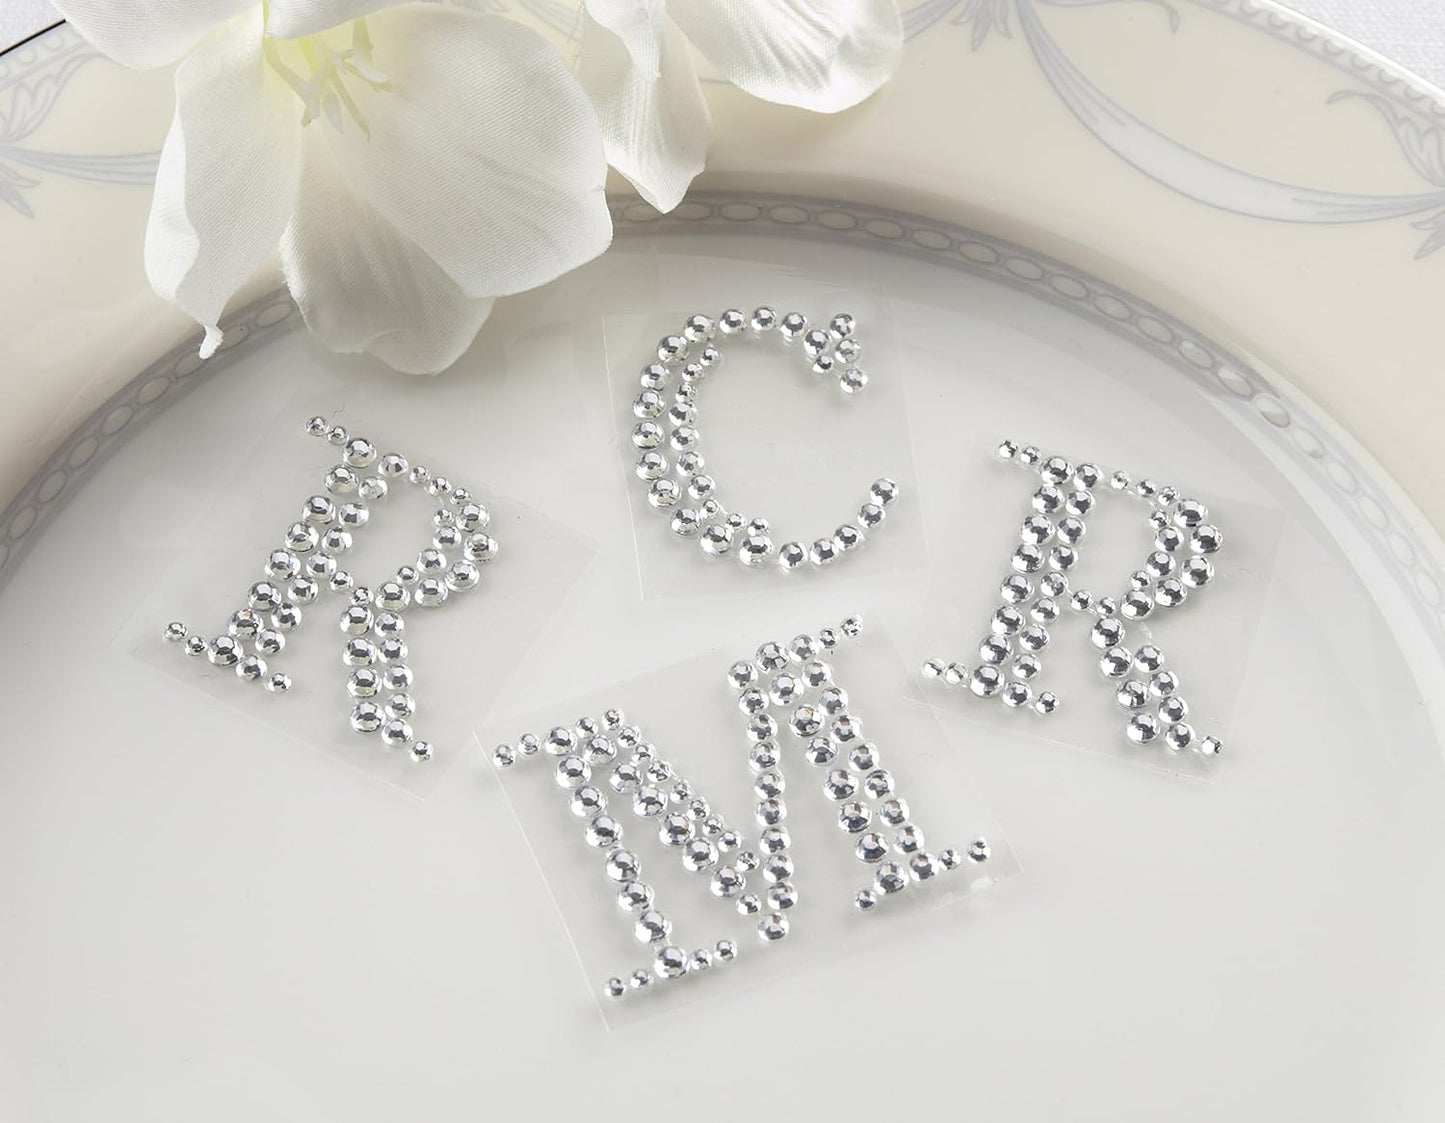 Jeweled Monogram Initials Set of 24 (Letters Only Box Not Included) Select Initials Availabe.